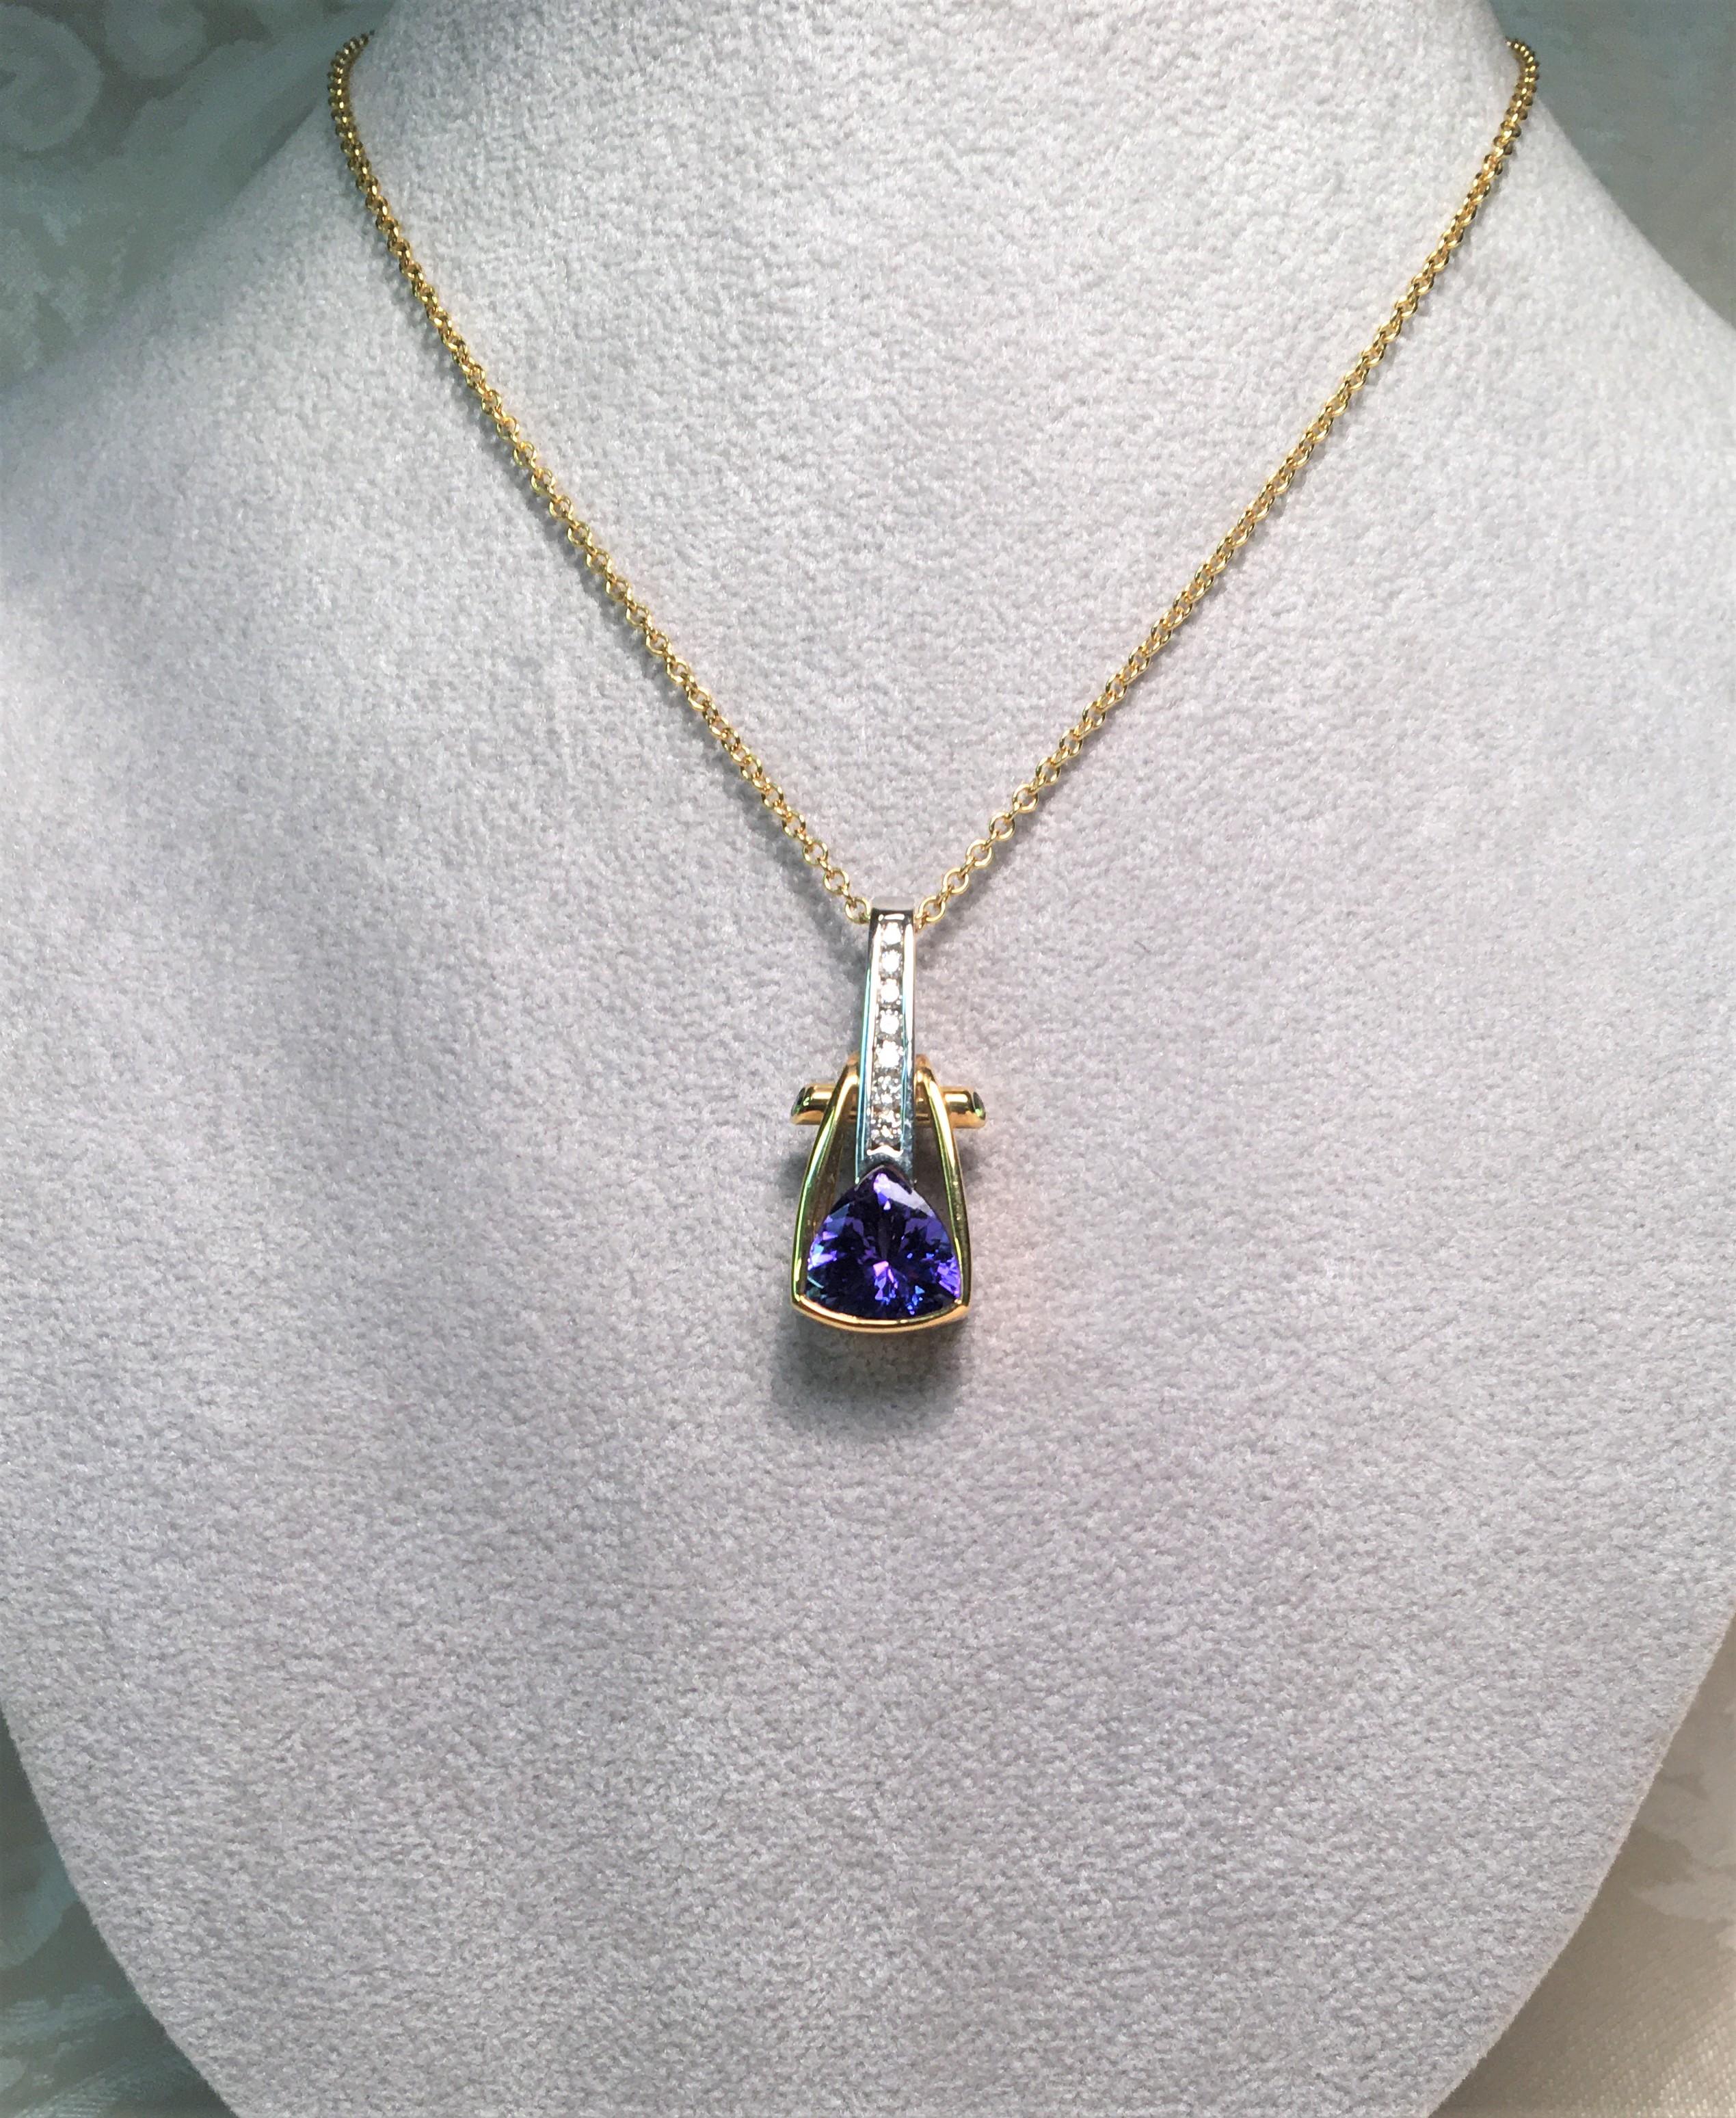 This beautiful pendant by Richard Krementz Gemstones will complete any outfit!
2.12 carat trillion tanzanite, fine bluish-purple color
7 round cut diamonds approximately .14 total diamond weight, channel set
2 round green faceted tsavorite stones,